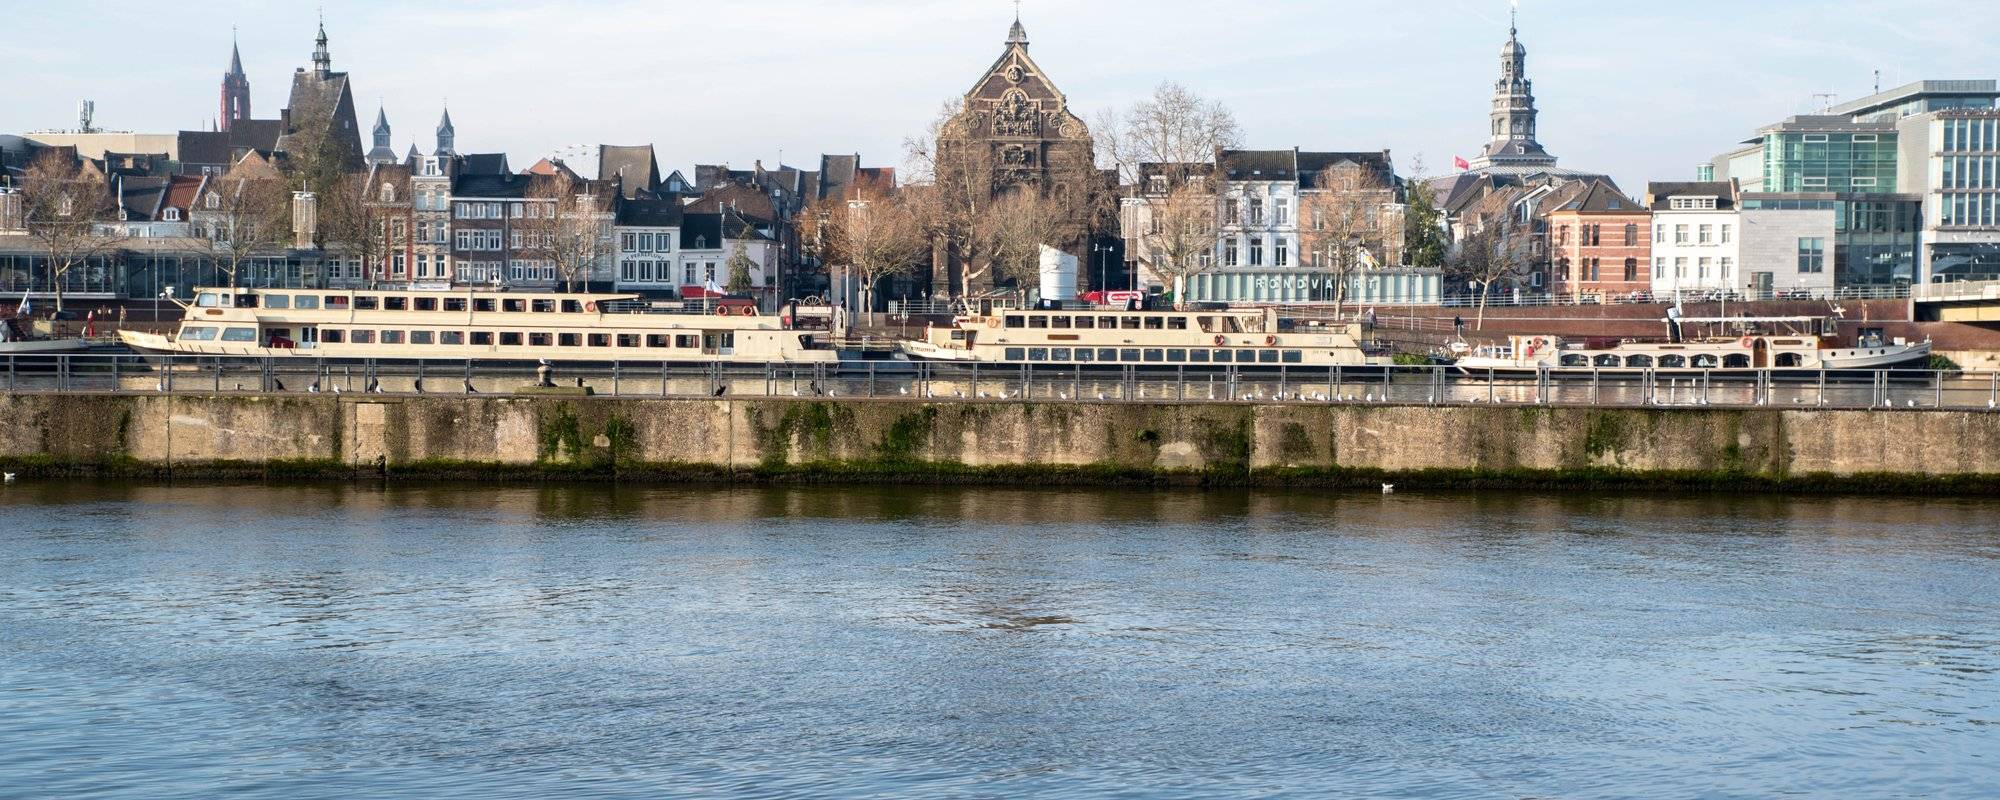 Maastricht - one of the oldest cities in Holland